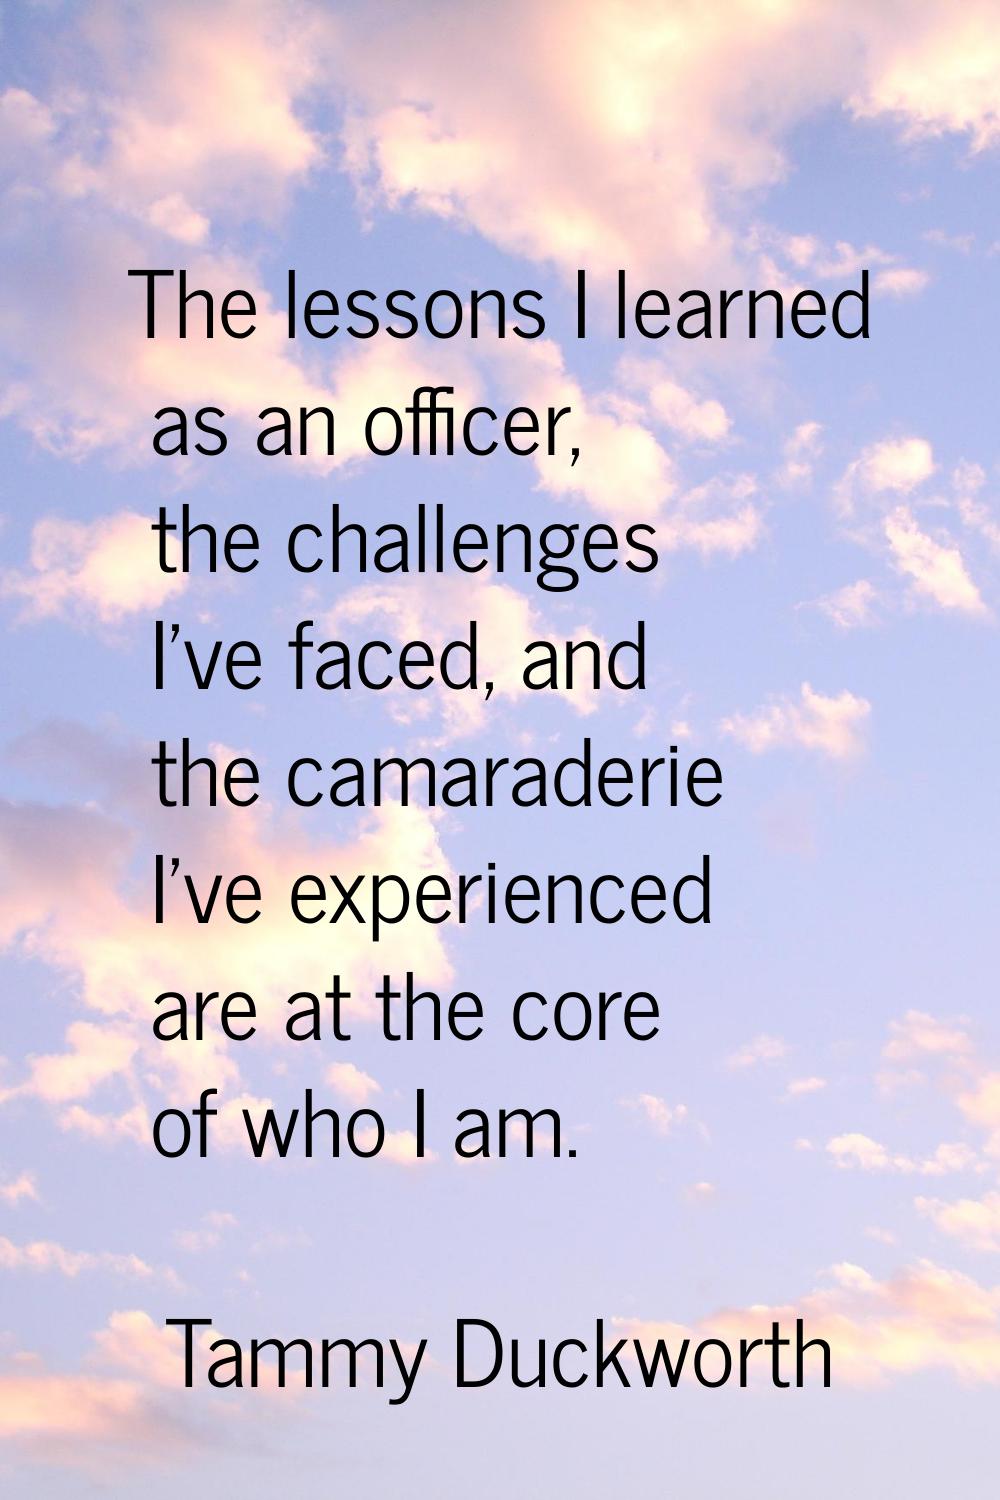 The lessons I learned as an officer, the challenges I've faced, and the camaraderie I've experience